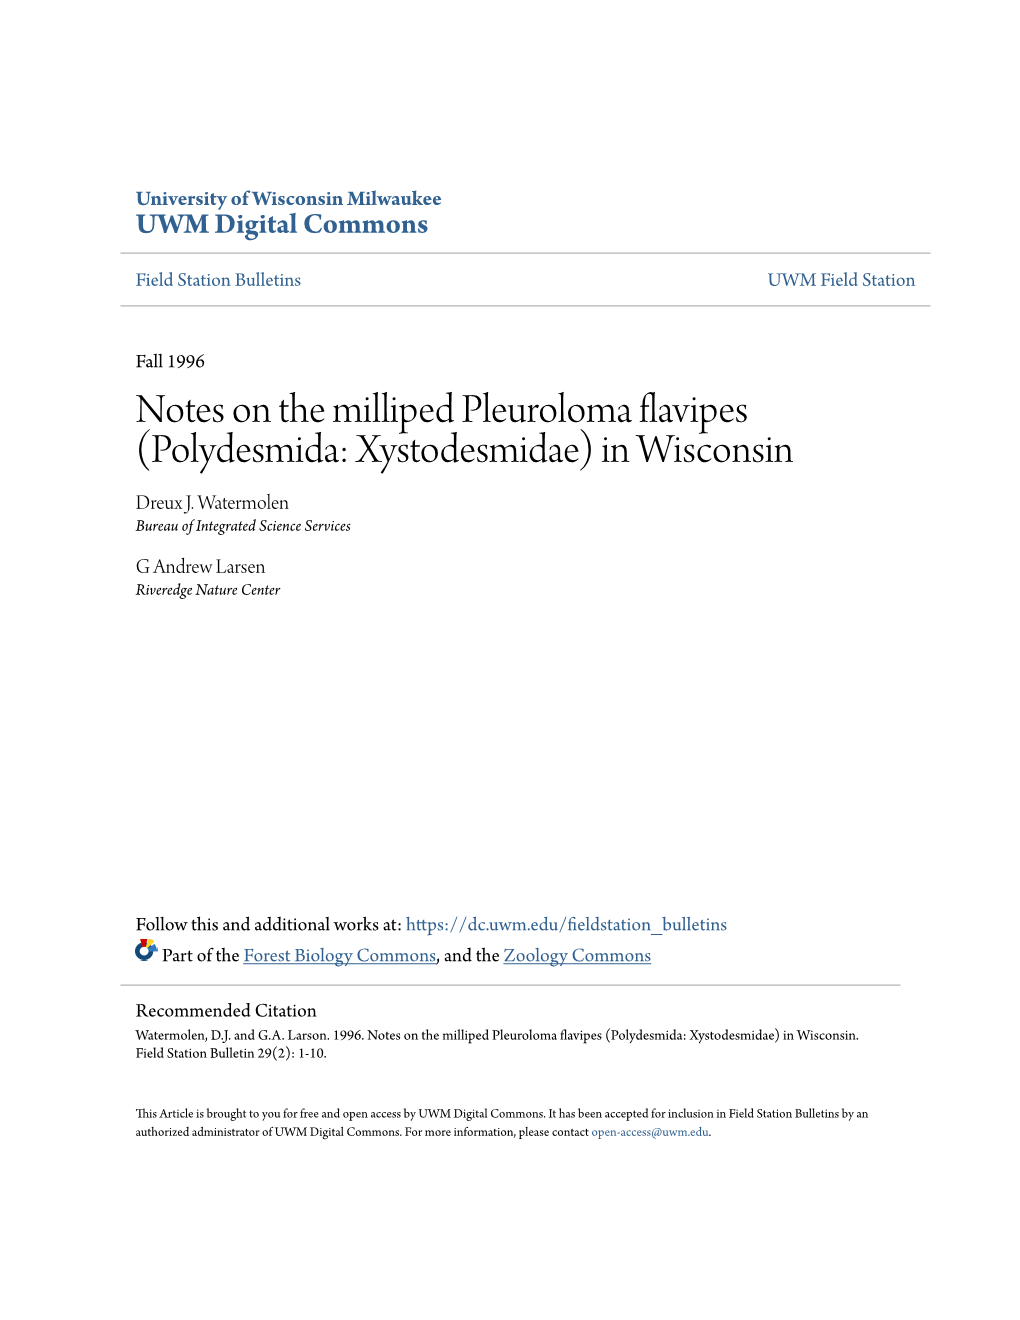 Notes on the Milliped Pleuroloma Flavipes (Polydesmida: Xystodesmidae) in Wisconsin Dreux J